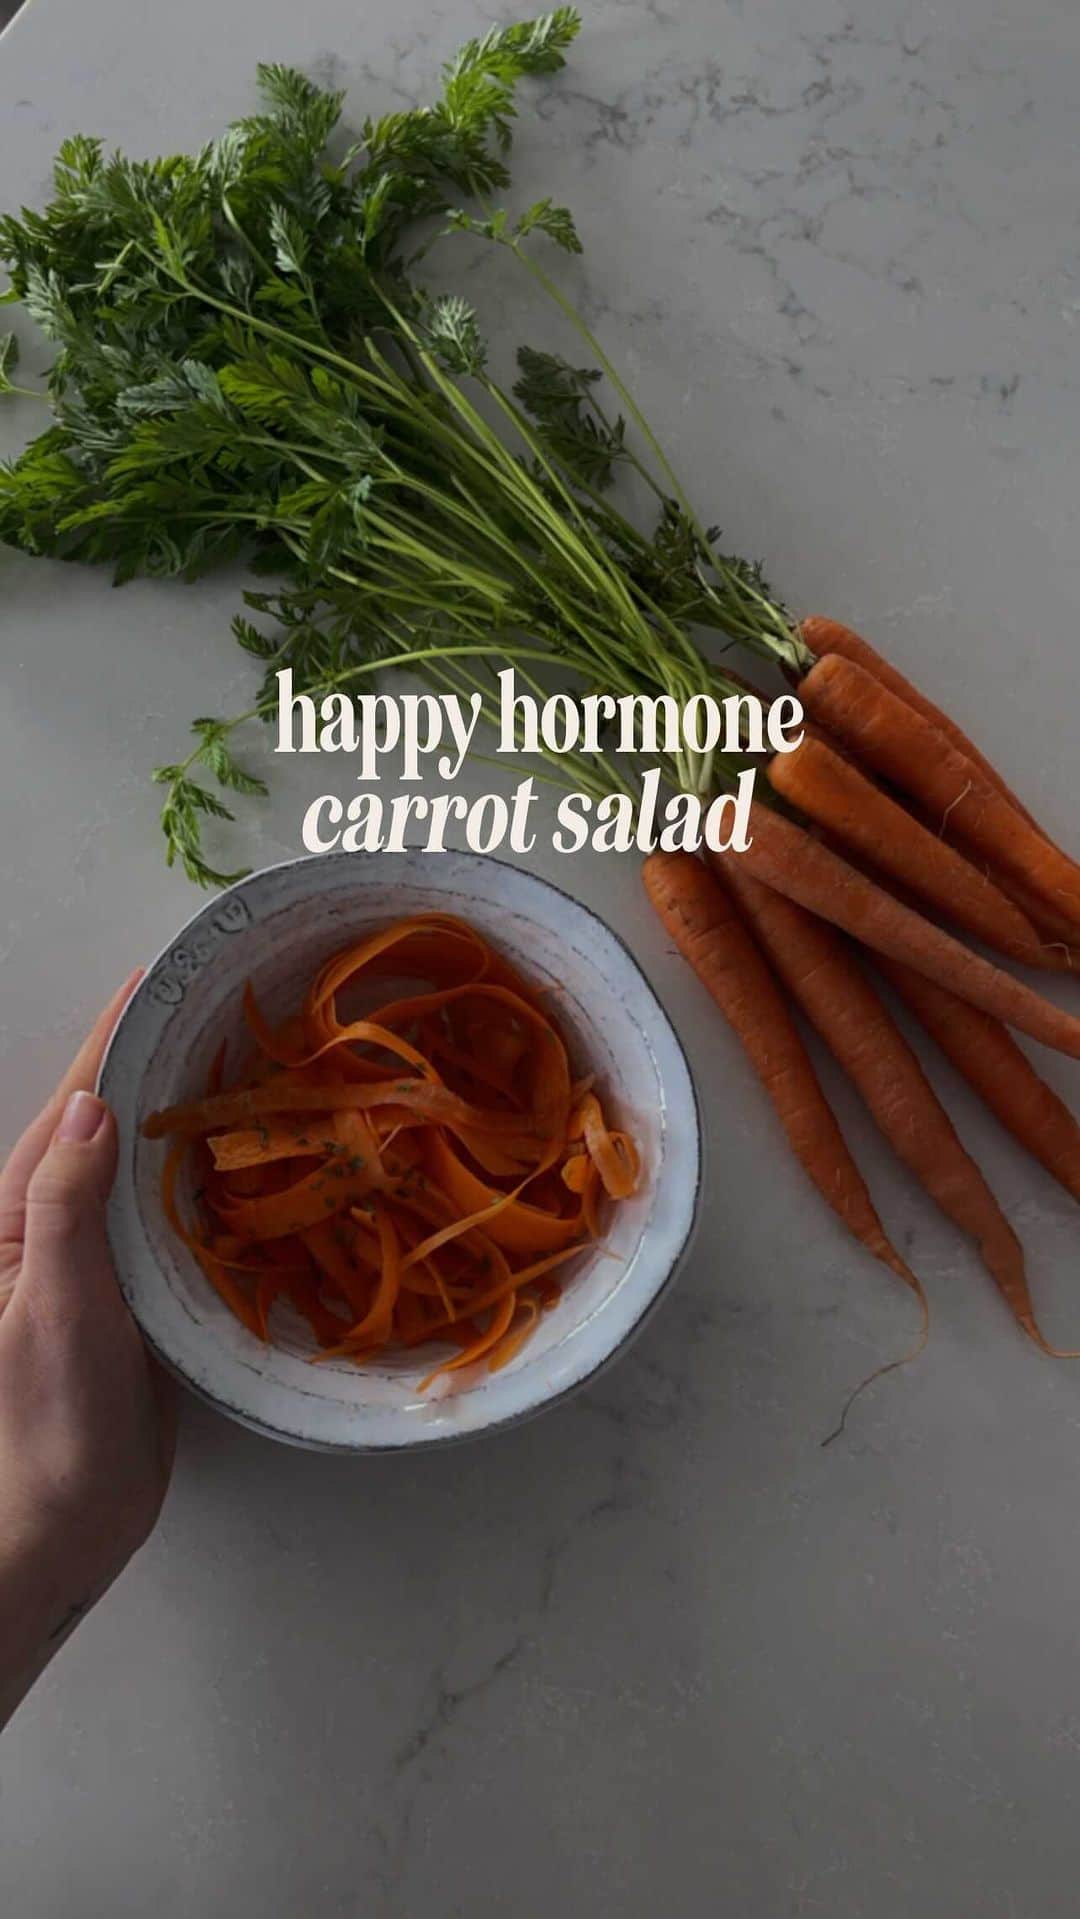 Stephanie Sterjovskiのインスタグラム：「This salad has gained so much popularity & I just feel like women should know about it…🥕🪄 There’s some magic to these long carrot ribbons that contain fibres which bind to excess estrogen to help you eliminate what you don’t need from your body & keep those hormones balanced and happy! We need estrogen, but high amounts can create not so fun disruptions in our body like PMS 👎 so I love this gentle, natural way to keep things like that at bay & it is delicious!! RECIPE: 1-2 long organic raw carrots (I shred mine in to long ribbons) 1 tbsp raw apple cider vinegar 1 tbsp coconut oil melted 1 tsp @redmondrealsalt Mix it all together and enjoy as a snack or a side dish! *I usually eat this raw salad from the follicular phase of my cycle to the beginning of my luteal phase (then I switch to warm soups & baked veggies all the way through my menstrual cycle) 😉 (not medical advice) #rawcarrotsalad #holisticnutritionstudent #hormonehealth #hormonehealing #happyhormones」